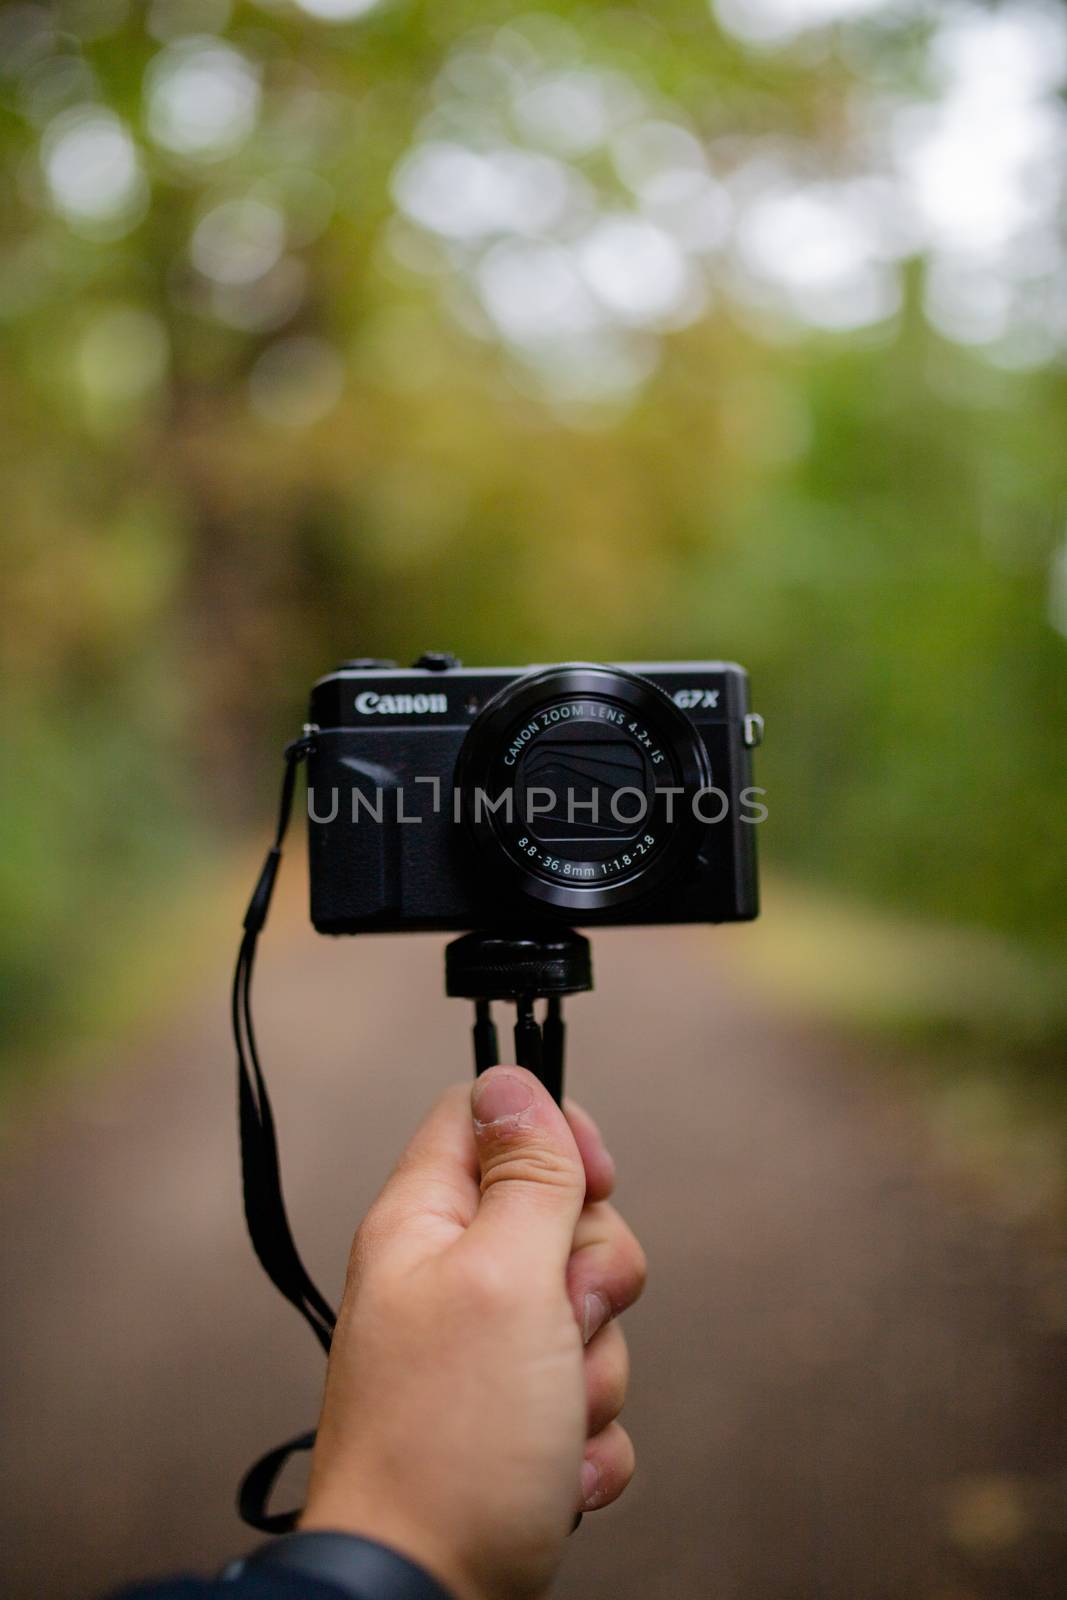 London, UK - September 30, 2020: Portrait View of a Hand Holding a Camera that faces the photographer, with a Blurry Forest as Background